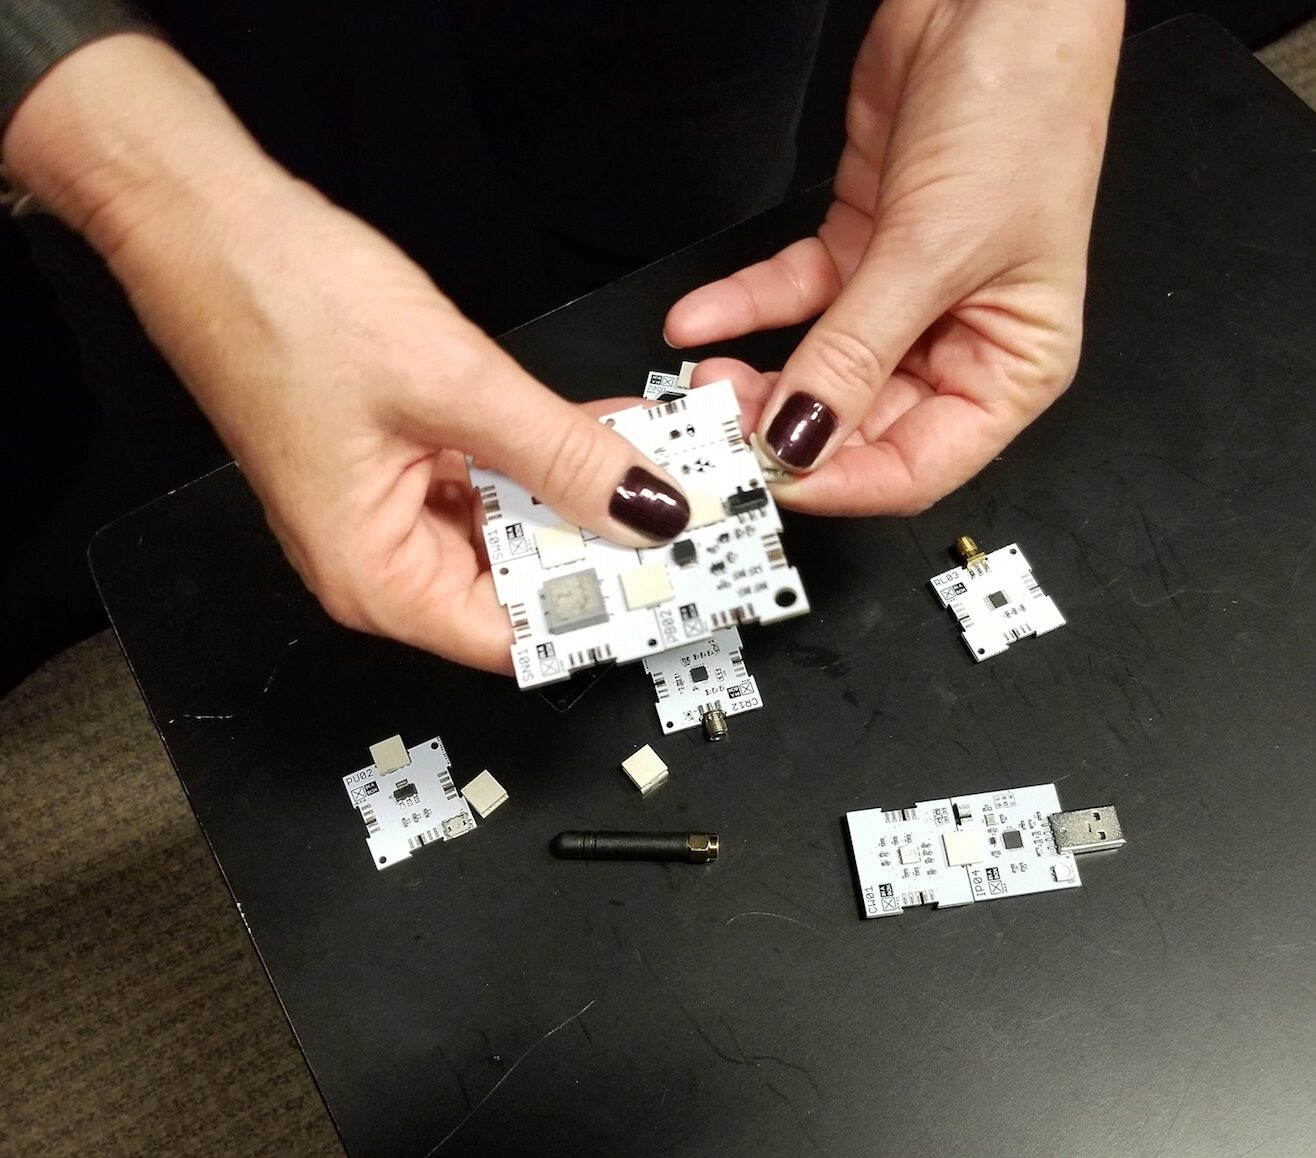 XinaBox components fit together with small connectors to create electronic circuits.